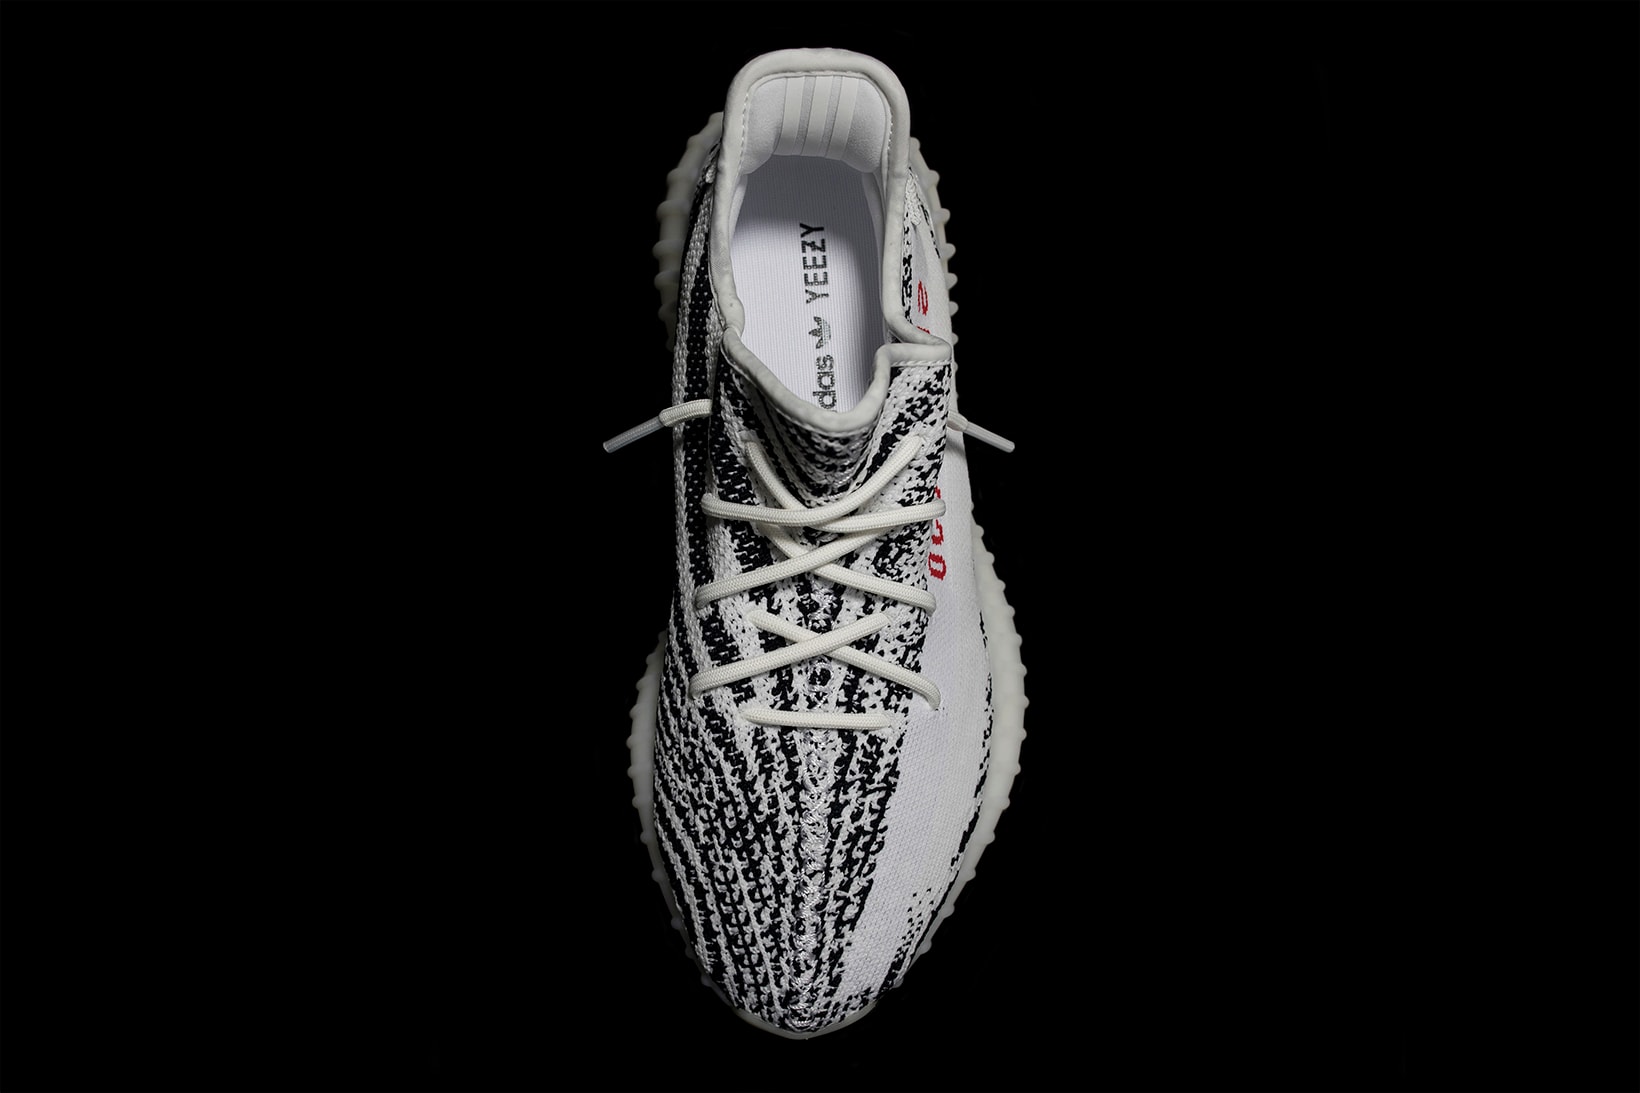 adidas Originals YEEZY BOOST 350 V2 Zebra Available at GOAT overhead view